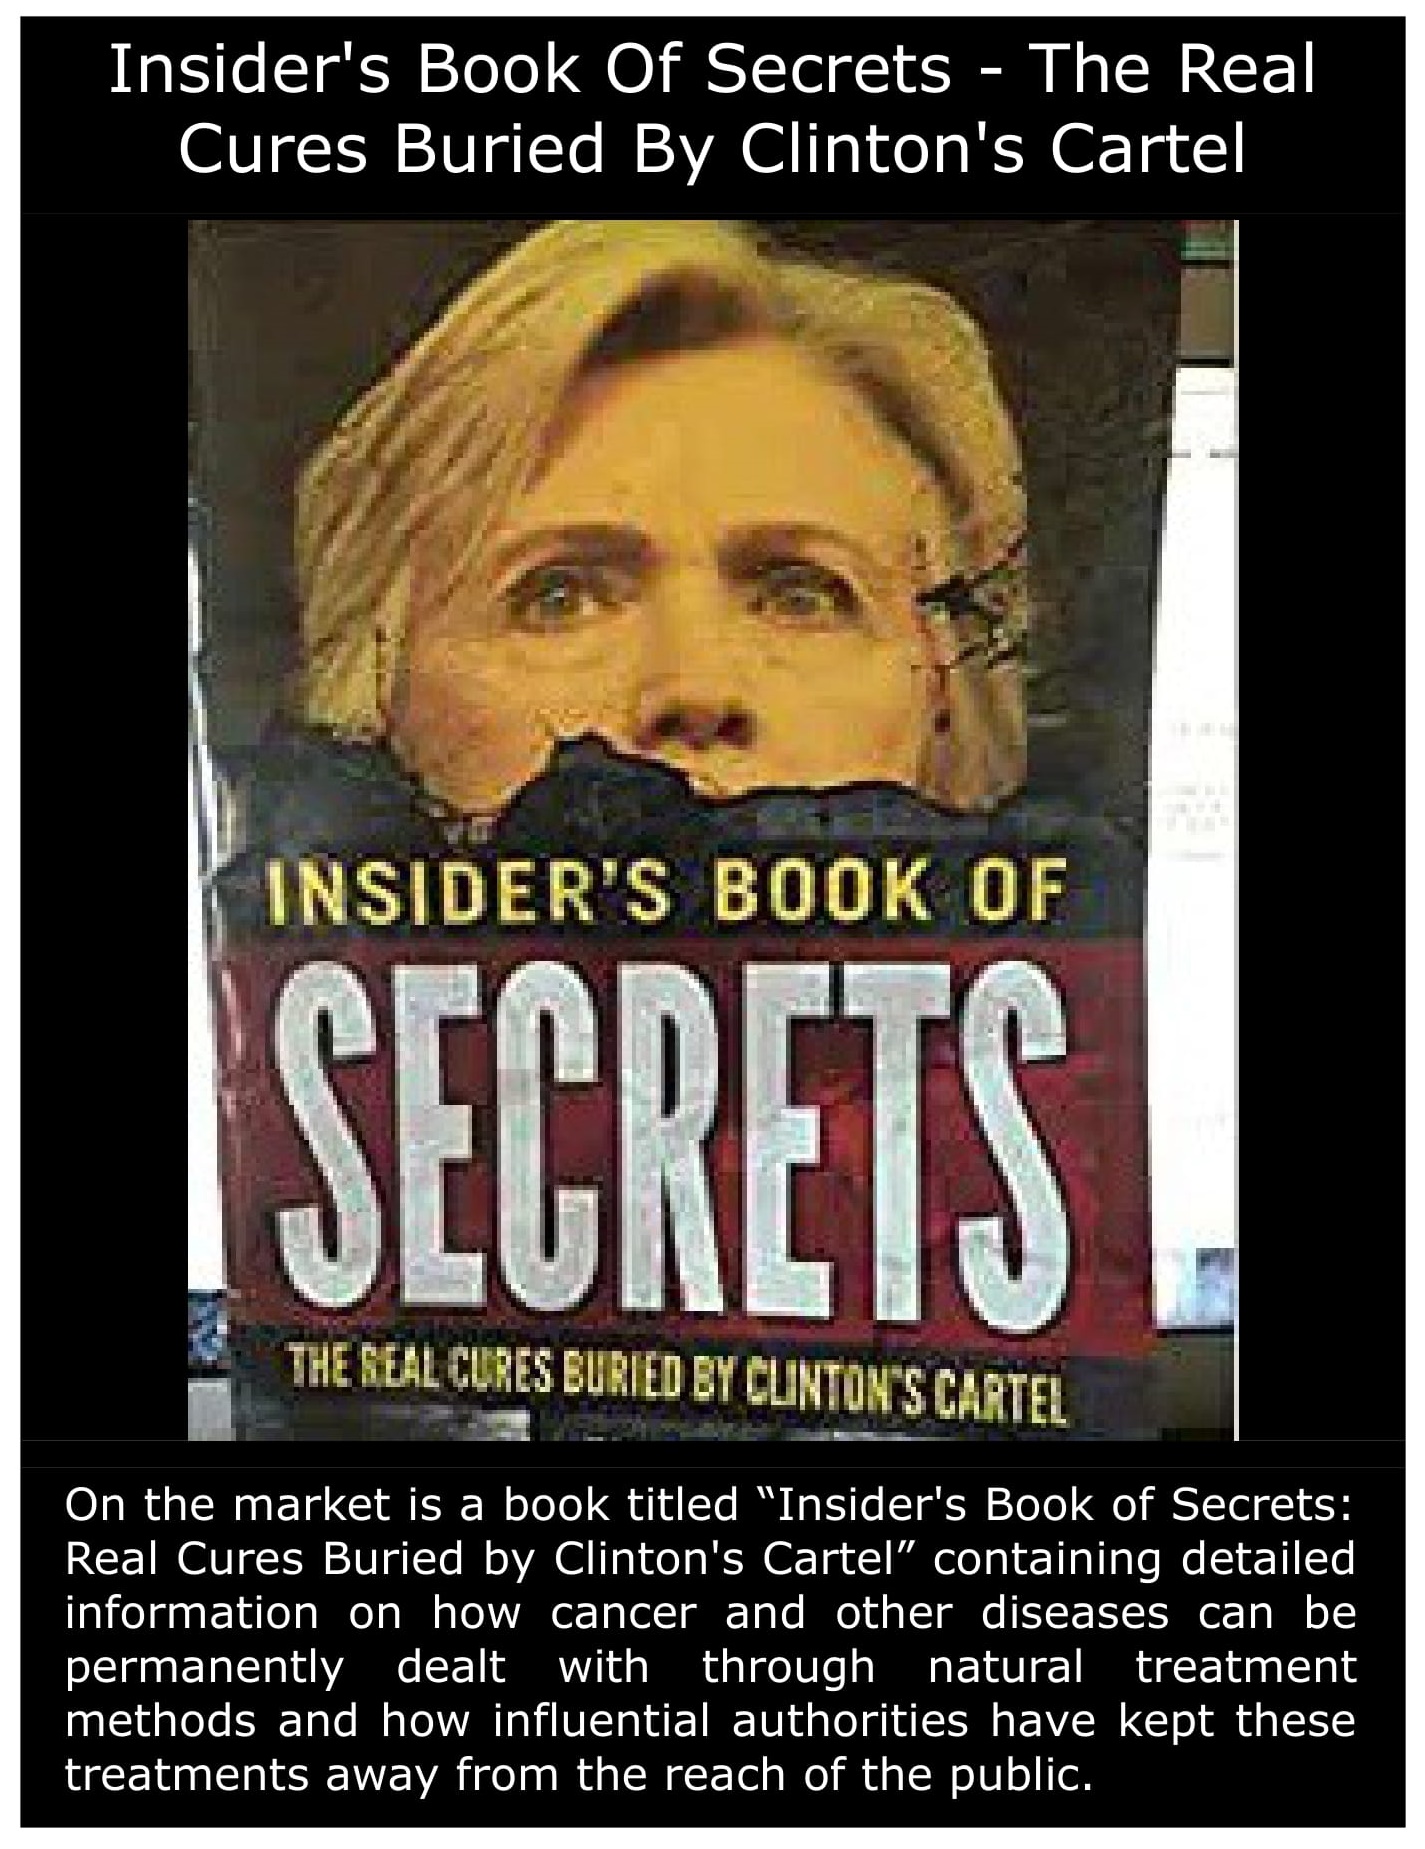 Insiders Book of Secrets - Real Cures Hidden by Clintons Cartel